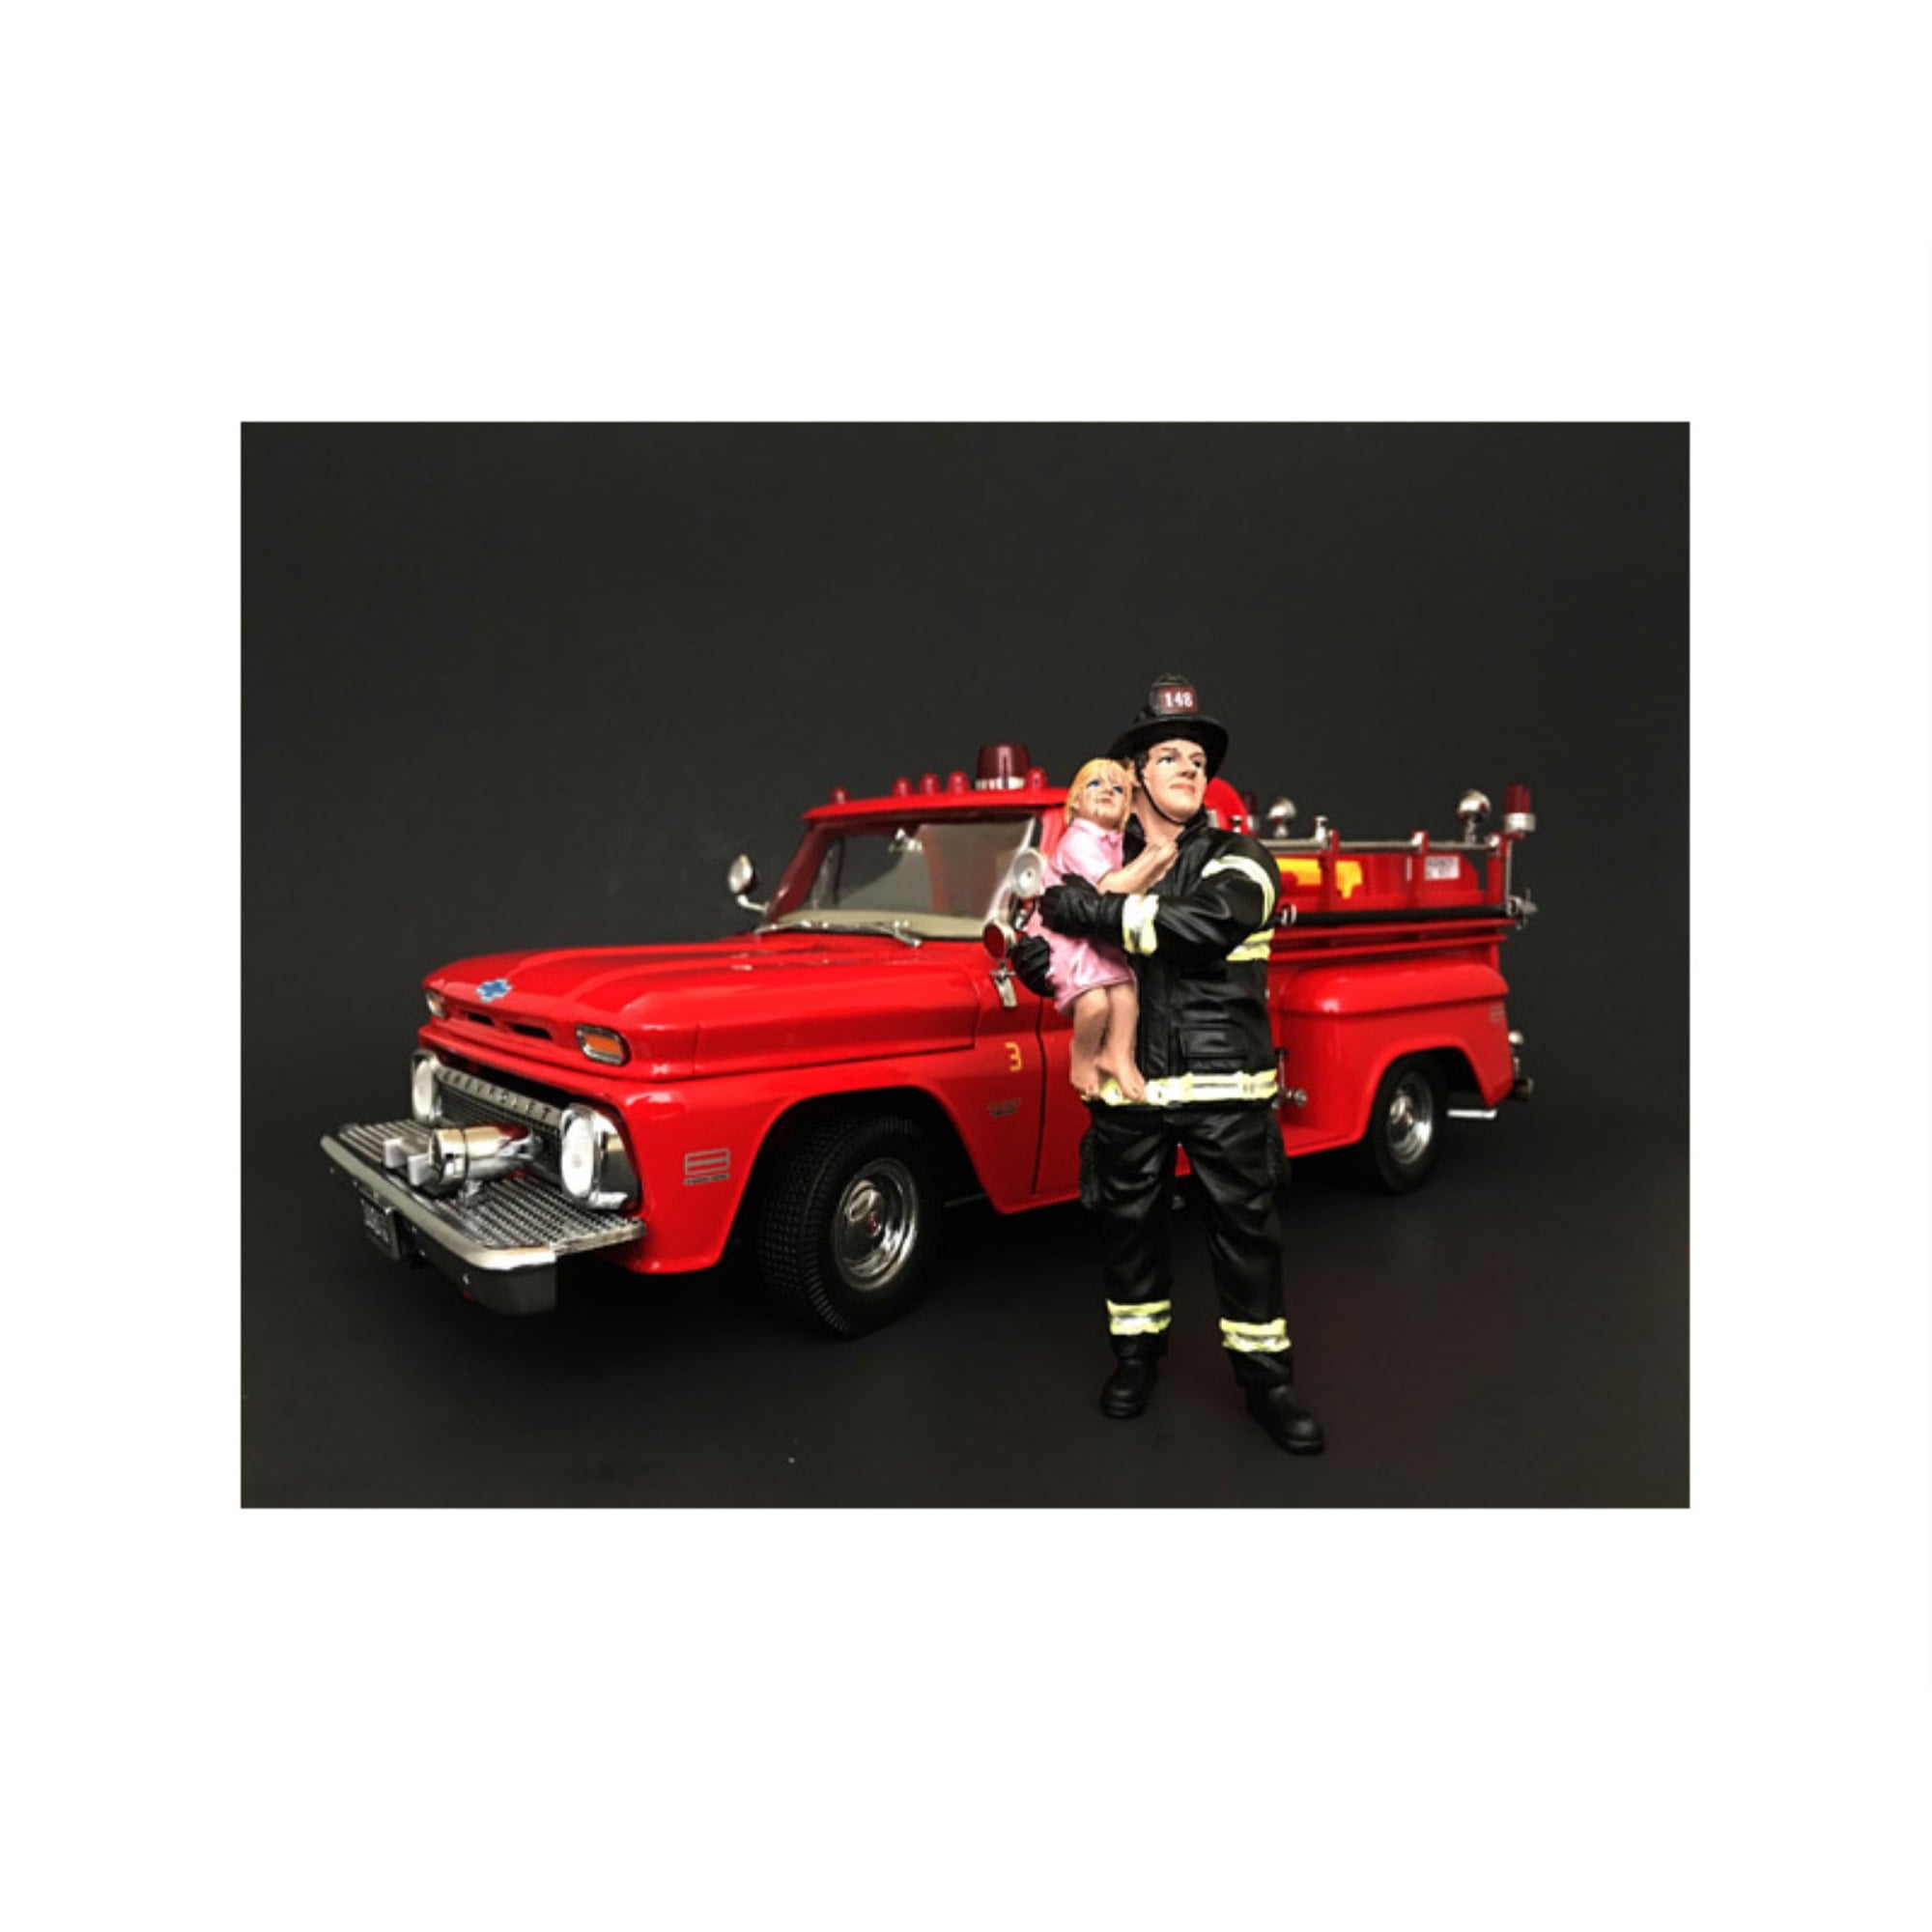 77510 Firefighter Saving Life With Baby Figurine & Figure For 1 Isto 24 Diecast Model Car